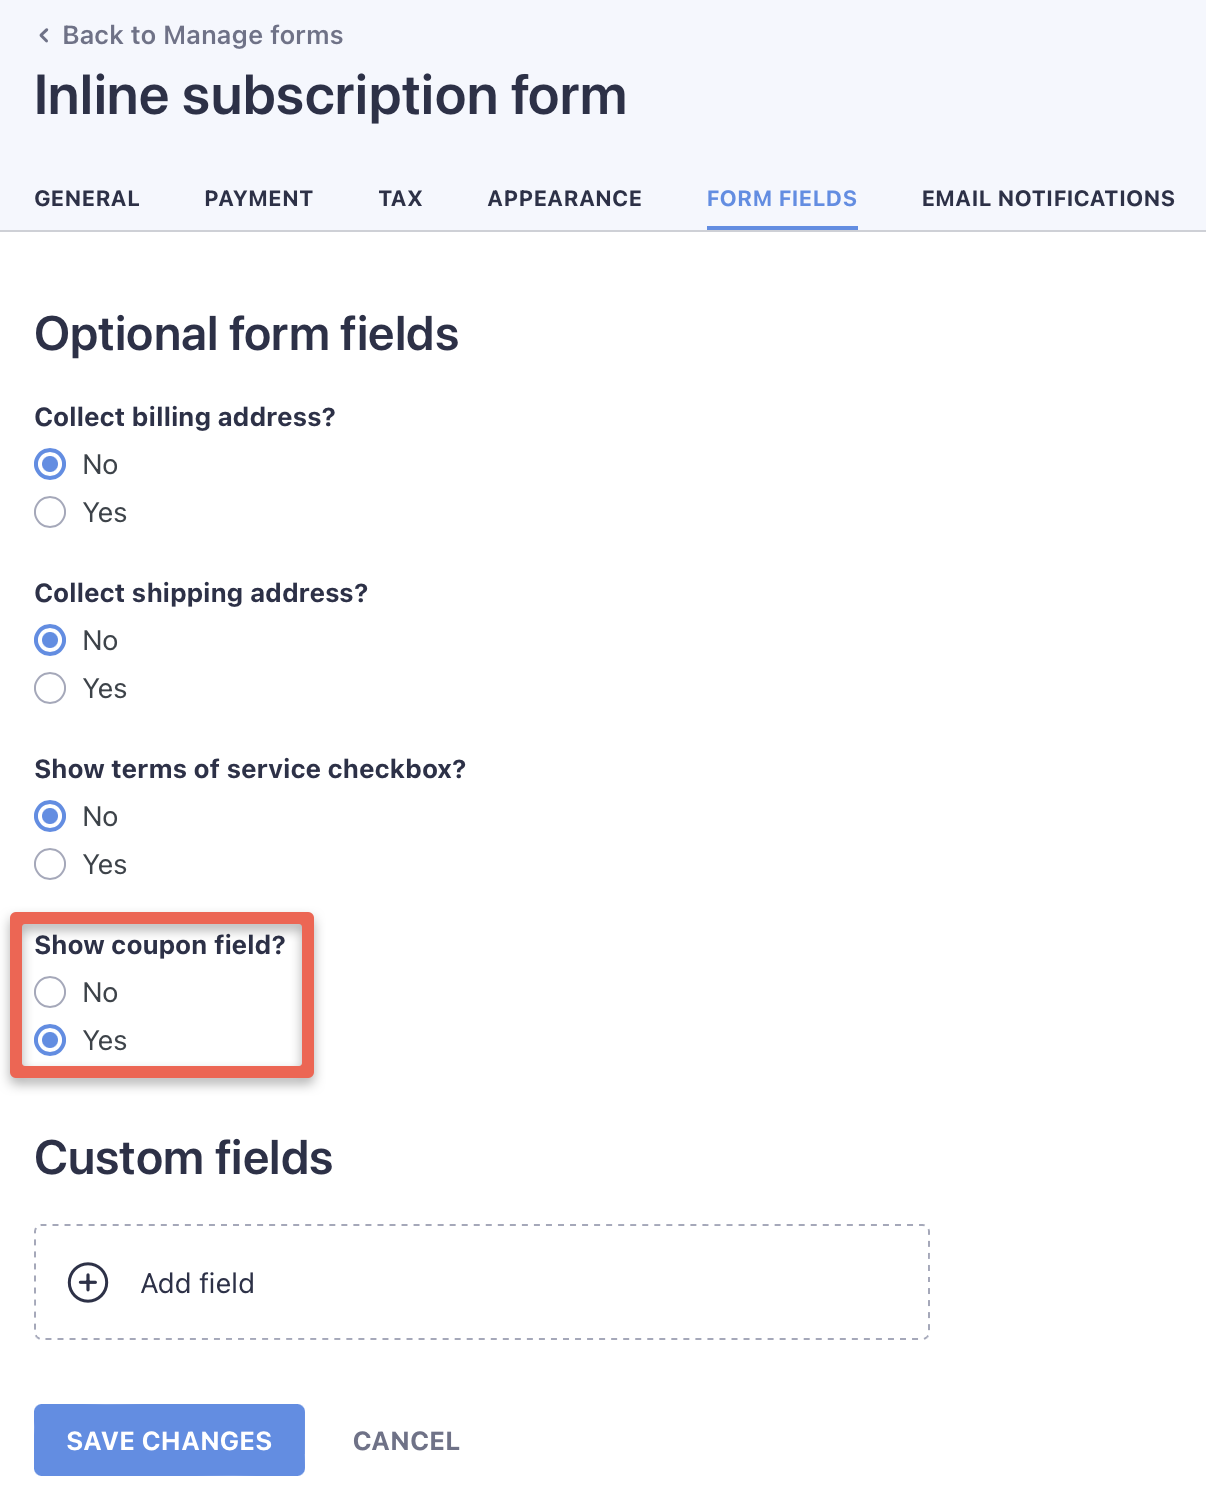 In WP Full Stripe, you can decide on a per-form basis if you want to show a coupon field.